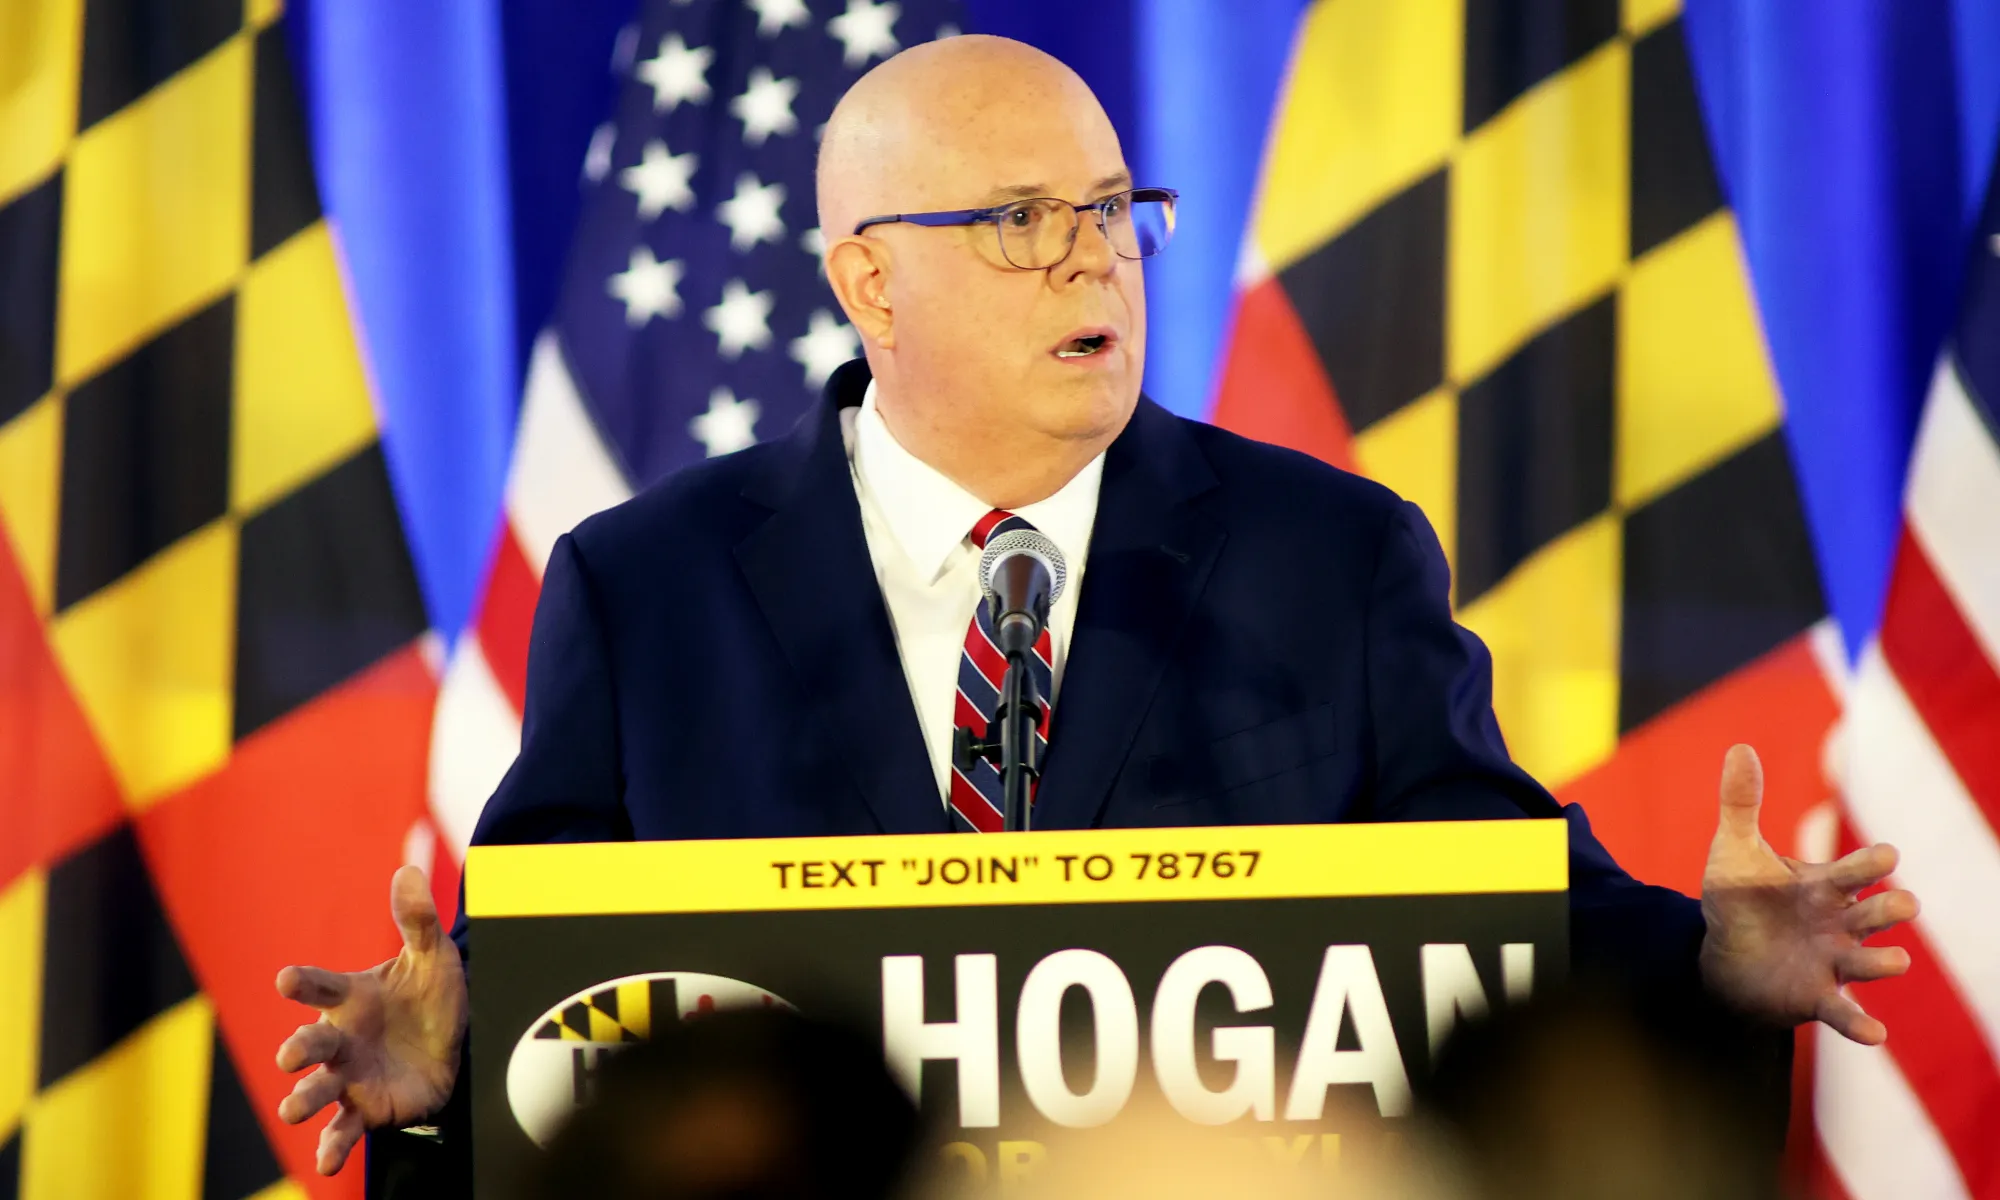 Democrats May Have Just Shot Themselves In The Foot In Maryland Senate Race